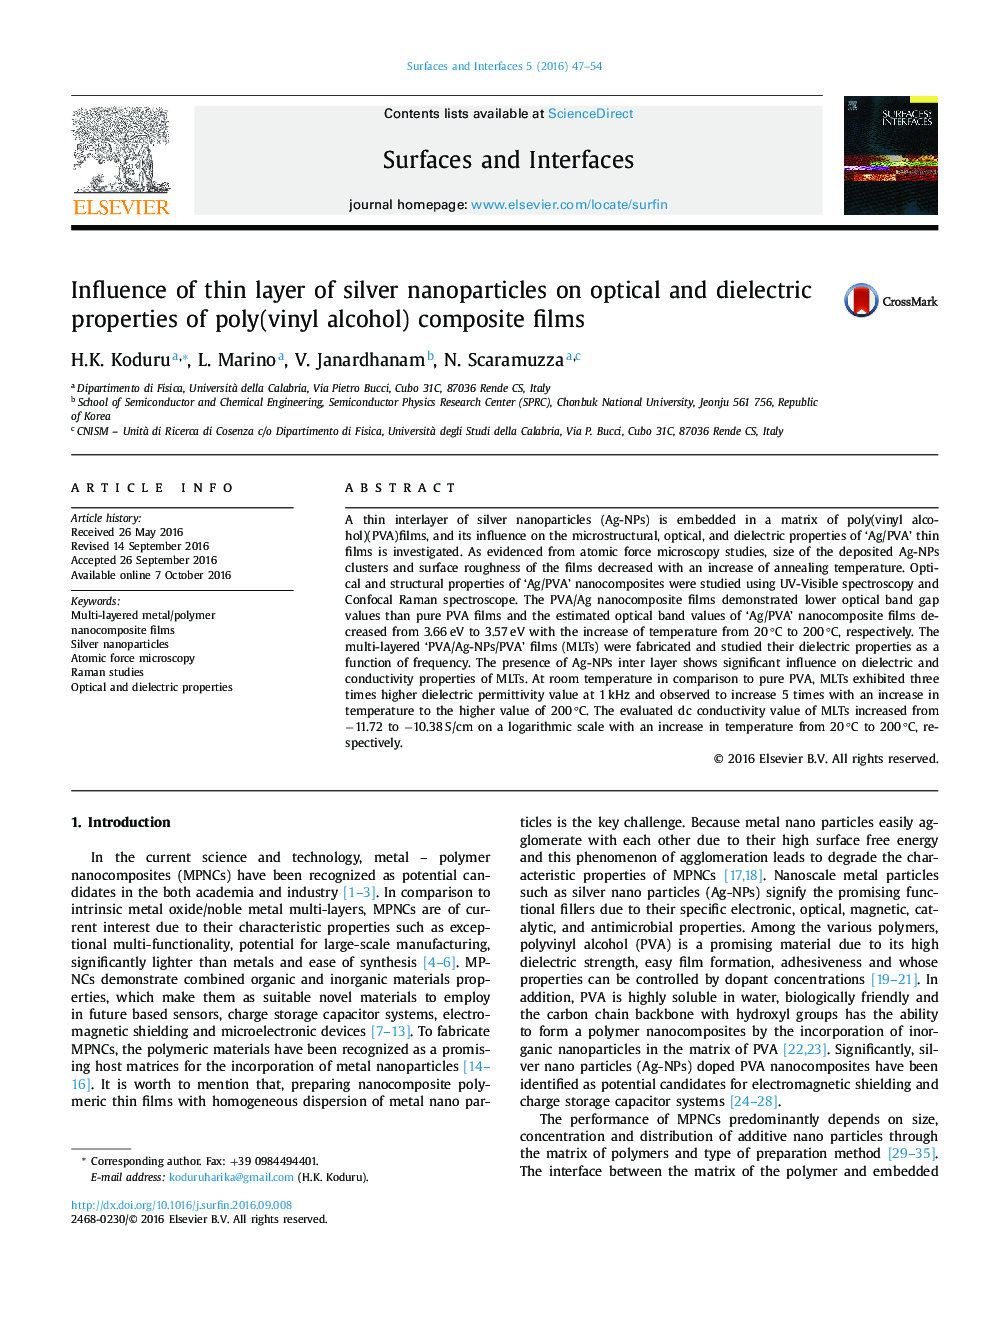 Influence of thin layer of silver nanoparticles on optical and dielectric properties of poly(vinyl alcohol) composite films